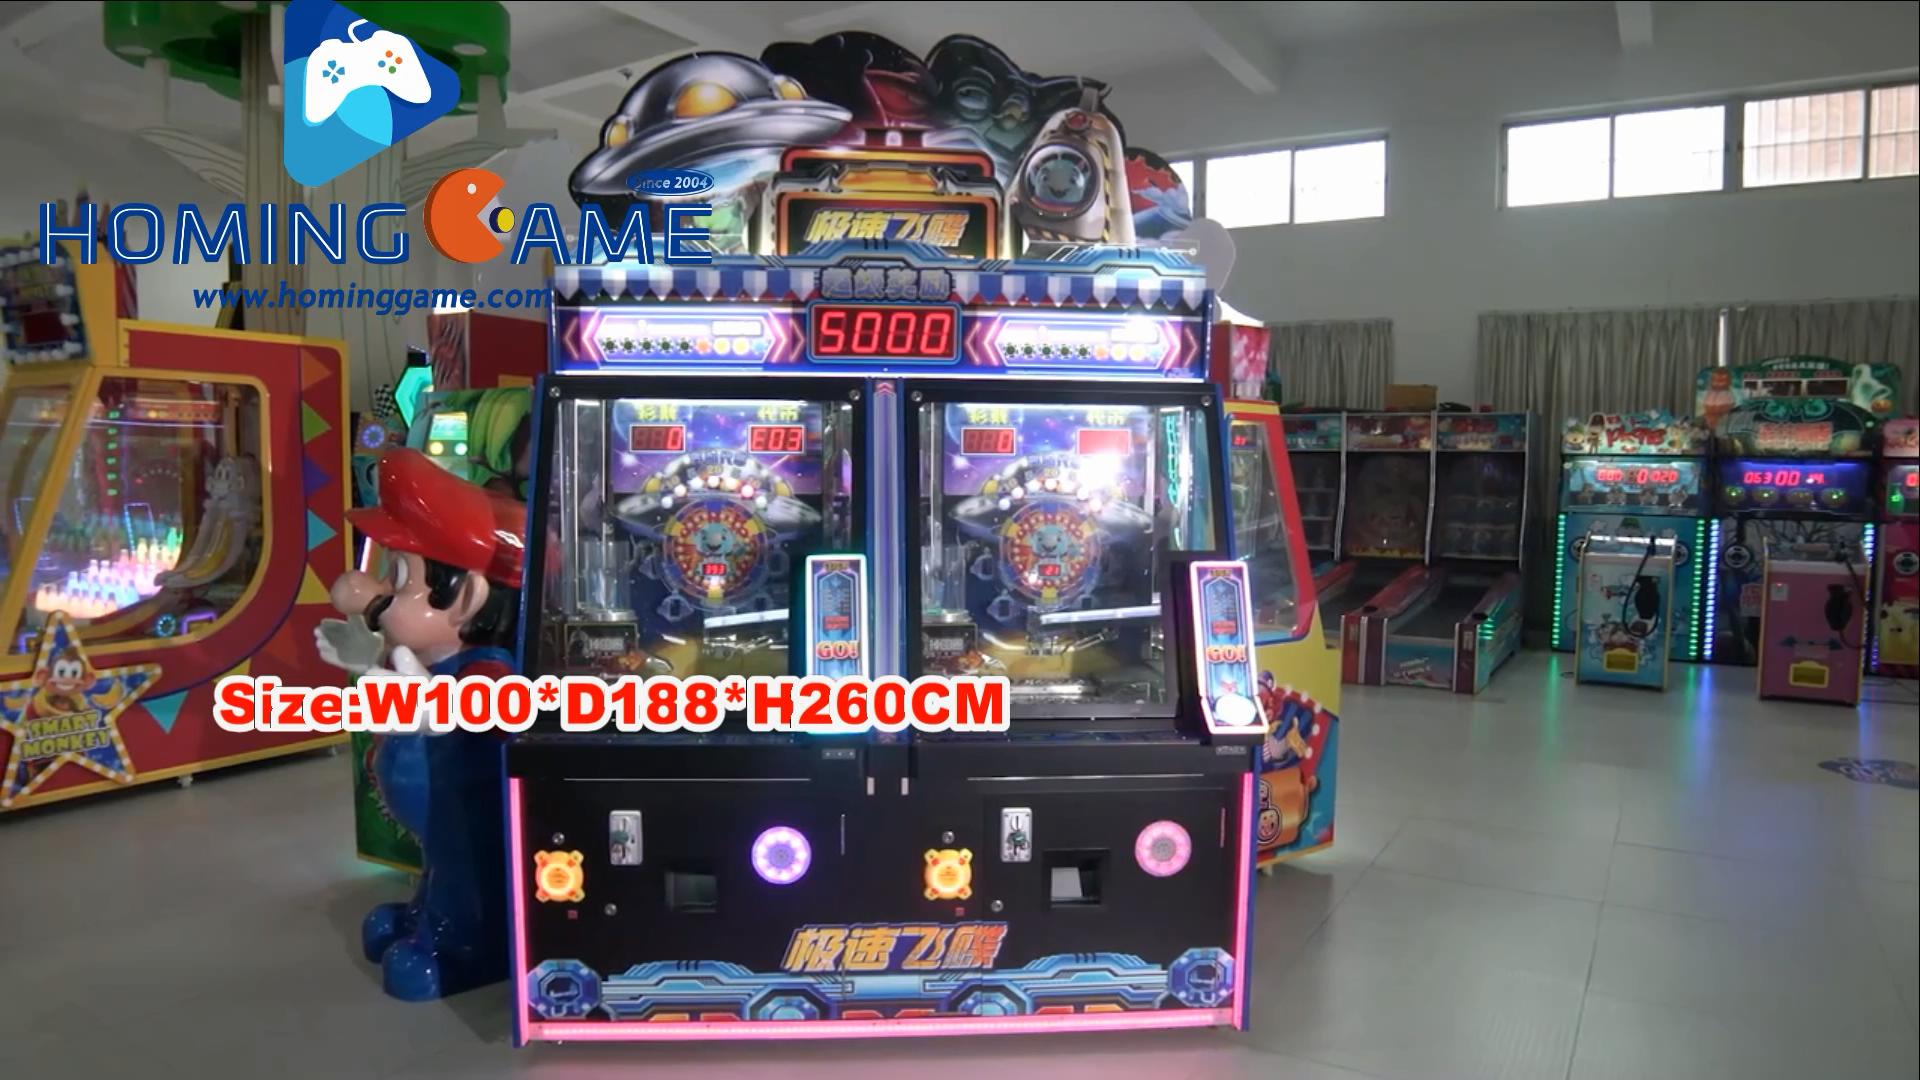 Hover race,hover race coin pusher game machine,hover race UFO coin pusher game machine,UFO coin pusher game machine,UFO token pusher game machine,happy crazy circus coin pusher game machine,happy crazy circus,happy crazy circus coin pusher arcade game machine,crazy circus,crazy circus coin pusher game machine,super crazy circus coin pusher game machine,penny pusher arcade game machine,penny pusher game machine,coin pusher game,token pusher game machine,crazy circus coin pusher arcade game machine,game machine,arcade game machine,coin operated game machine,indoor game machine,electrical game machine,amusement park game equipment,game equipment,coin pusher redemption game machine,hominggame,hominggame coin pusher game machine,gametube.hk,www.gametube.hk,coin pusher arcade games,3 player coin pusher game machine,2 player coin pusher game machine,flip 2 win coin pusher game machine,gold fort coin pusher game machine,las vegas coin pusher game machine,Pharaoh's Treasure coin pusher game machine/hot game machine,Aura,aura 2 win coin pusher game machine,future world coin pusher game machine,benthal house coin pusher game machine,fire house coin pusher game machine,penny pusher,penny pusher game,token pusher game,USA coin pusher game machine,electrical coin pusher game machine